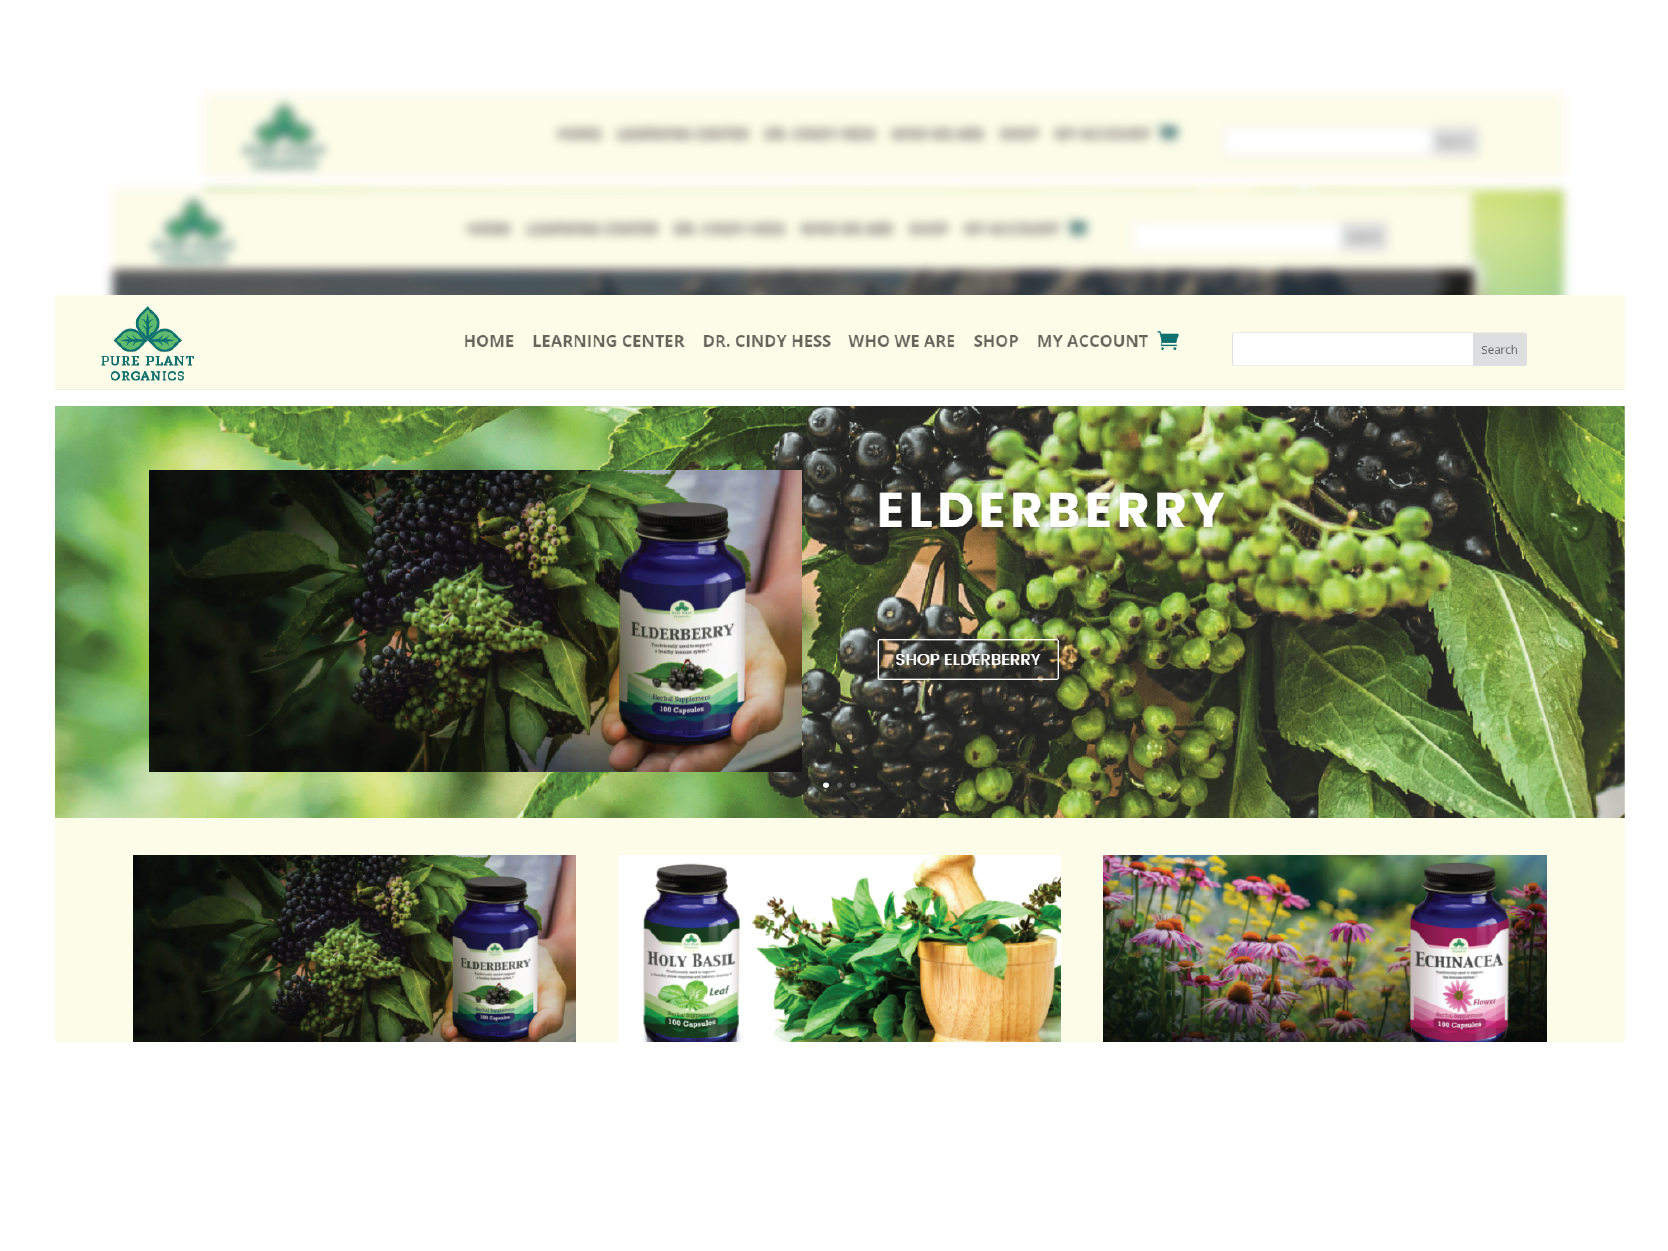 screenshot of pages from Pure Plant Organics page